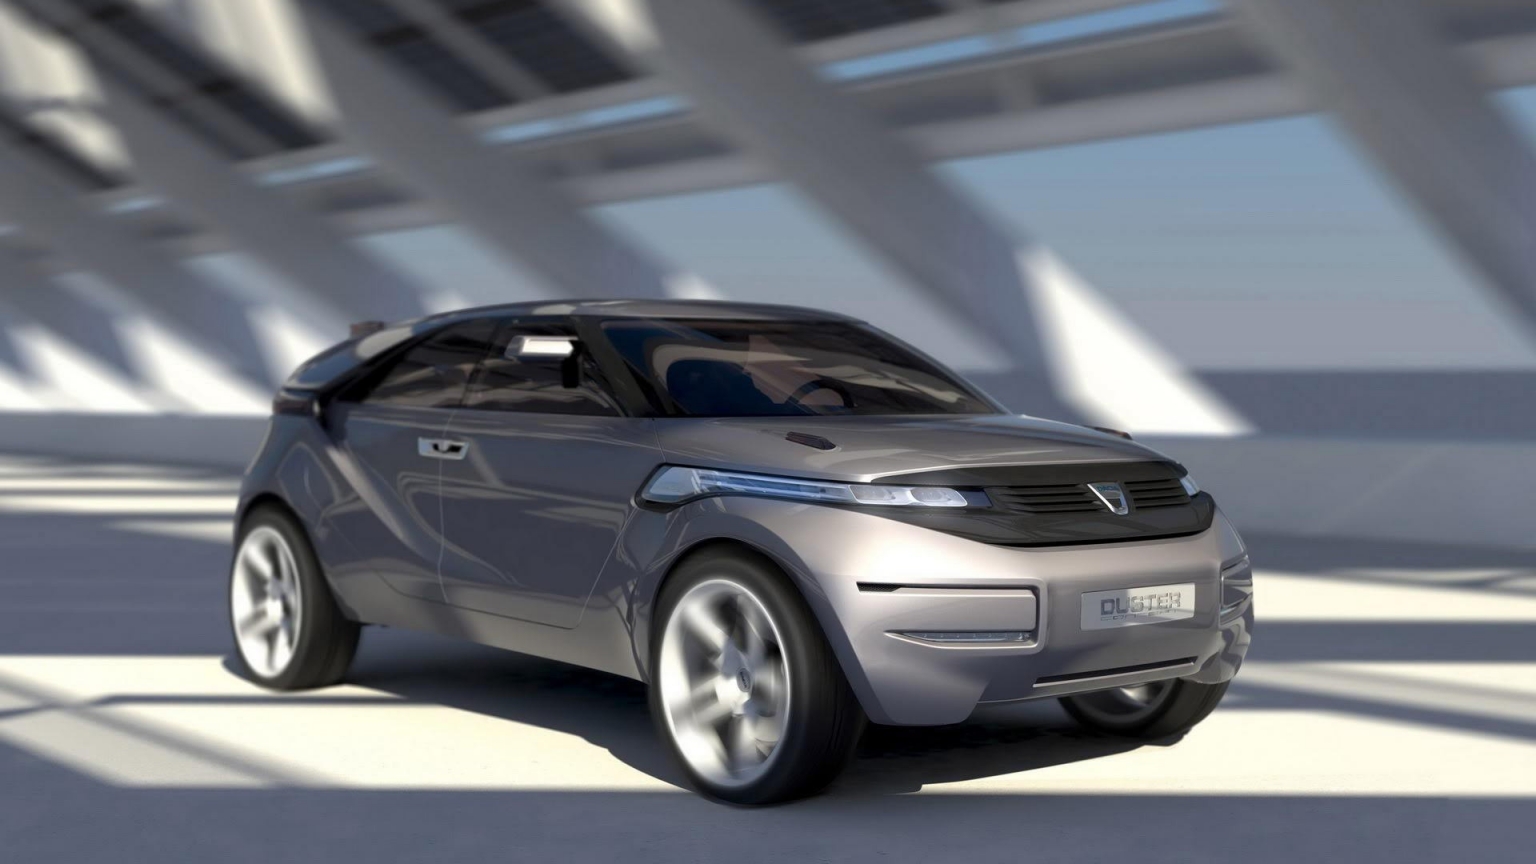 Dacia Duster Crossover Concept Running for 1536 x 864 HDTV resolution